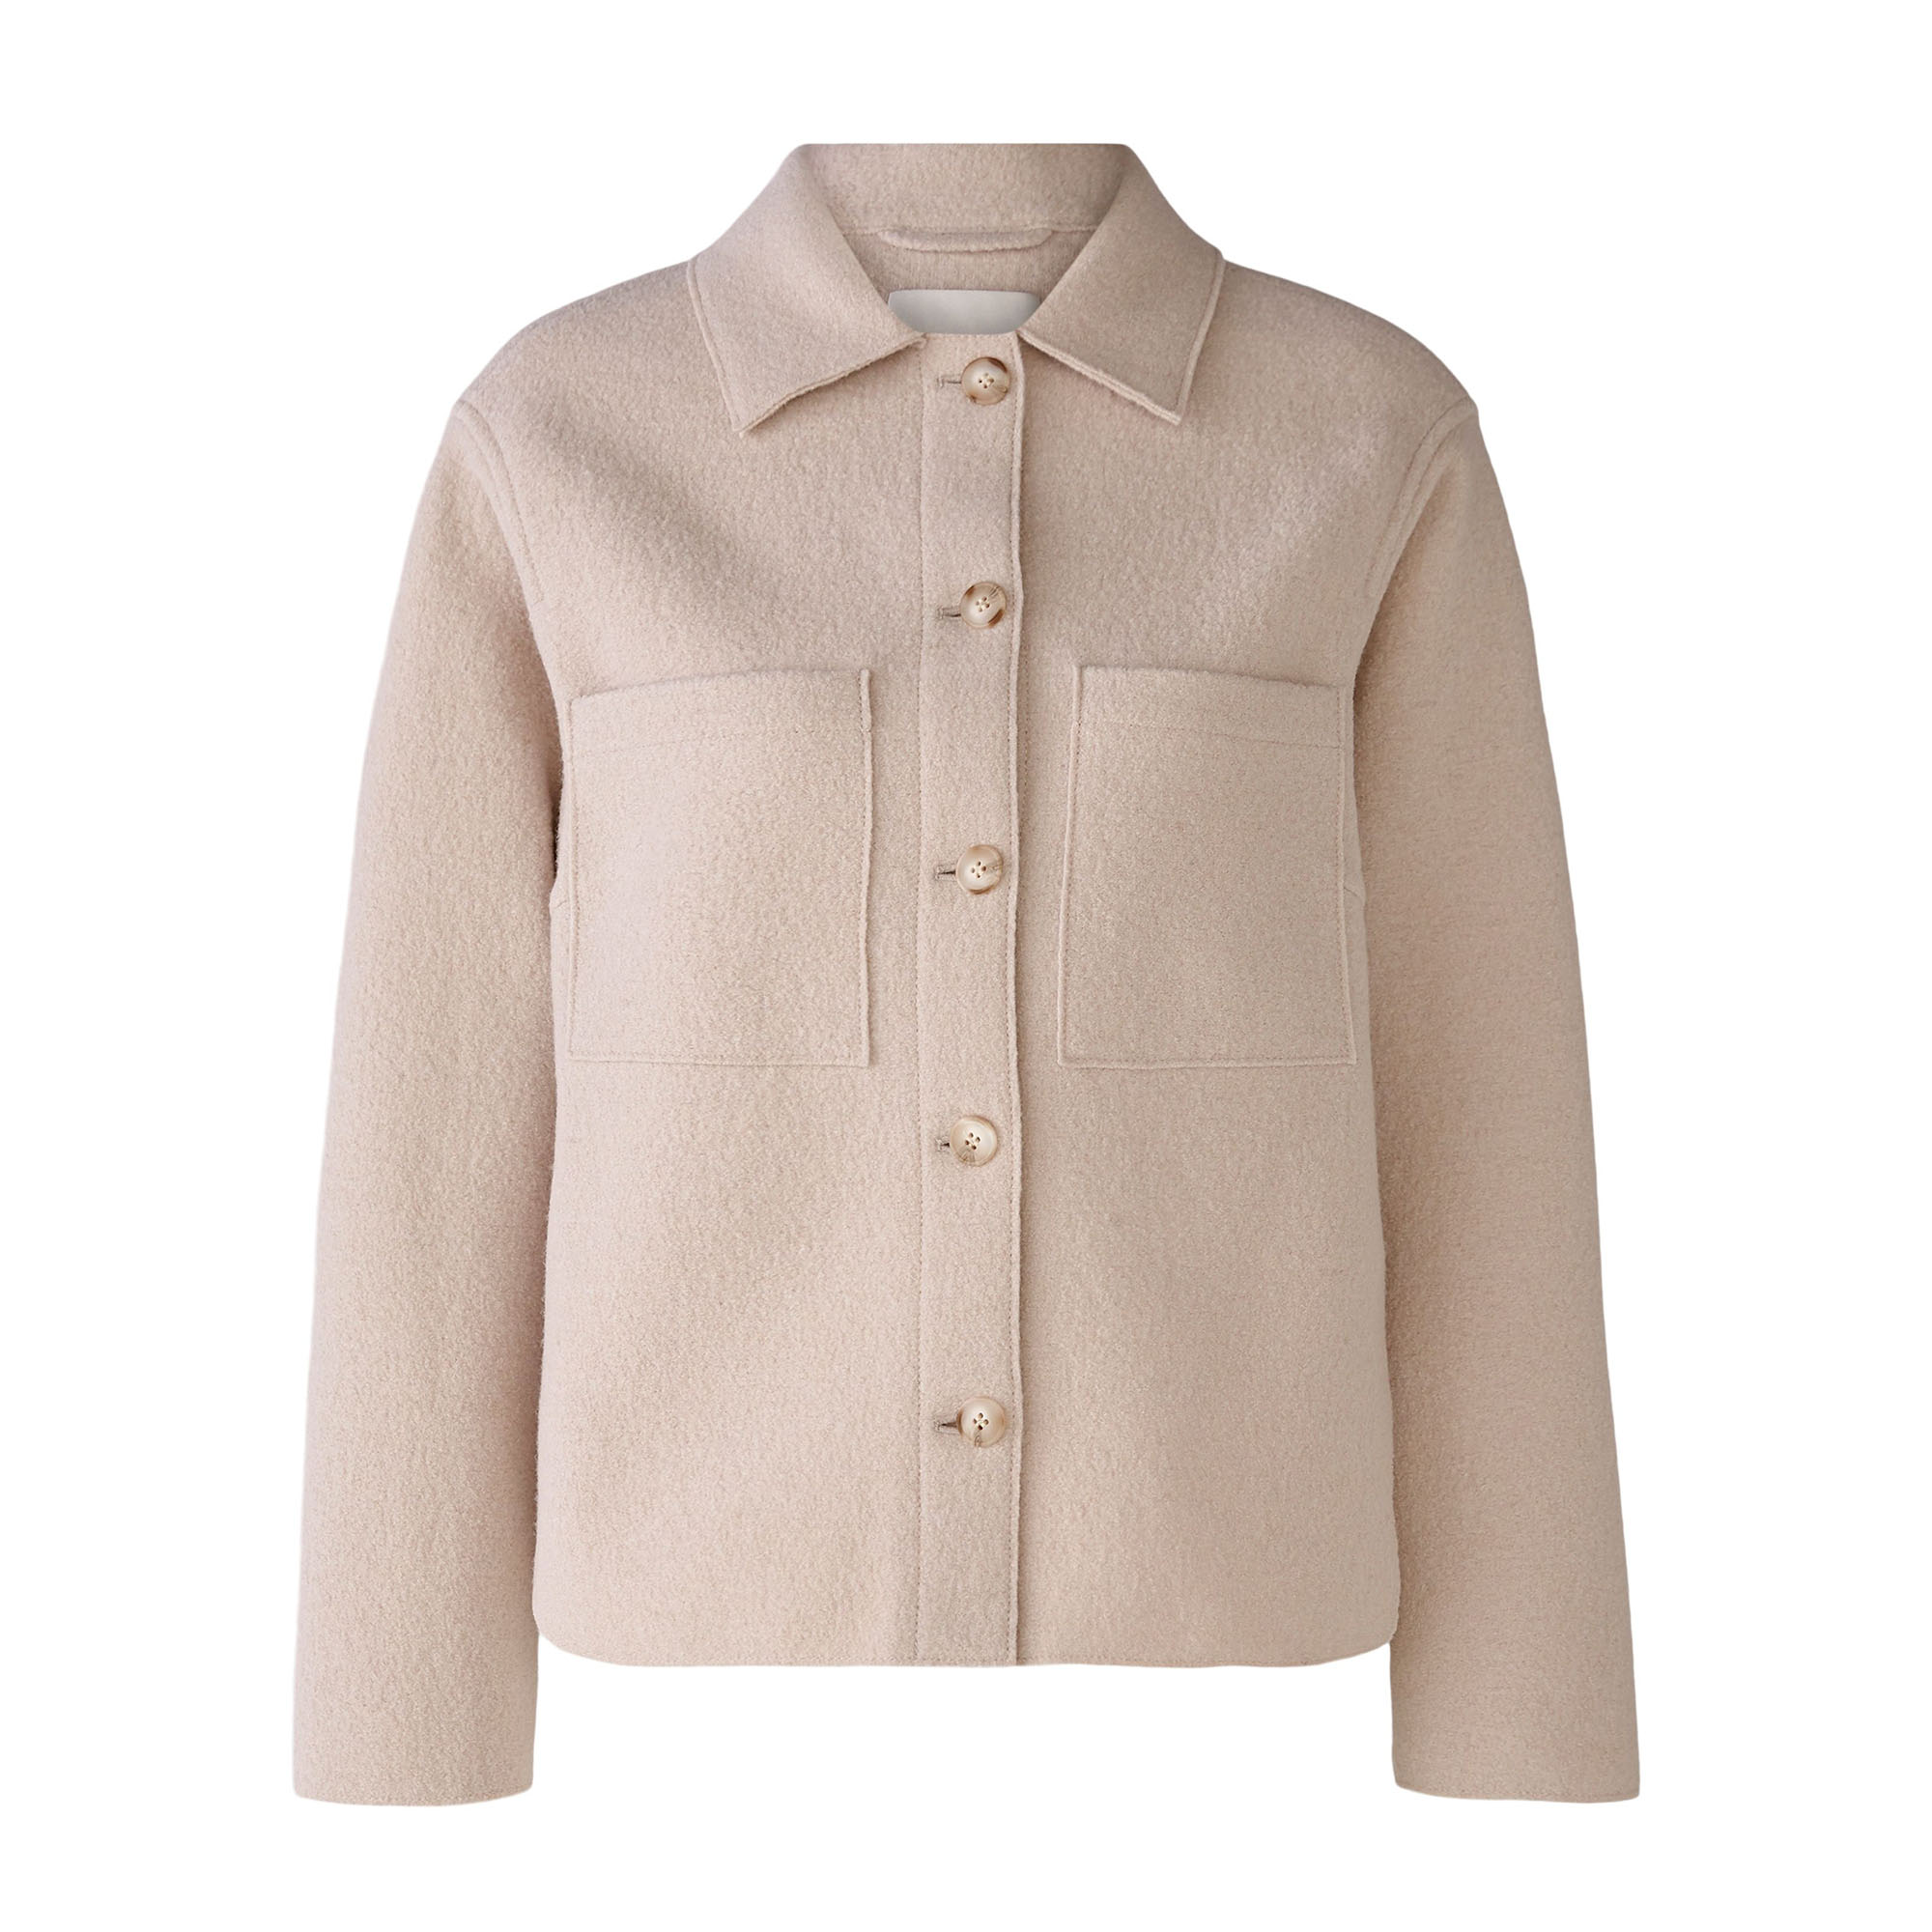 Oui Fashion Jacket From Boiled Wool